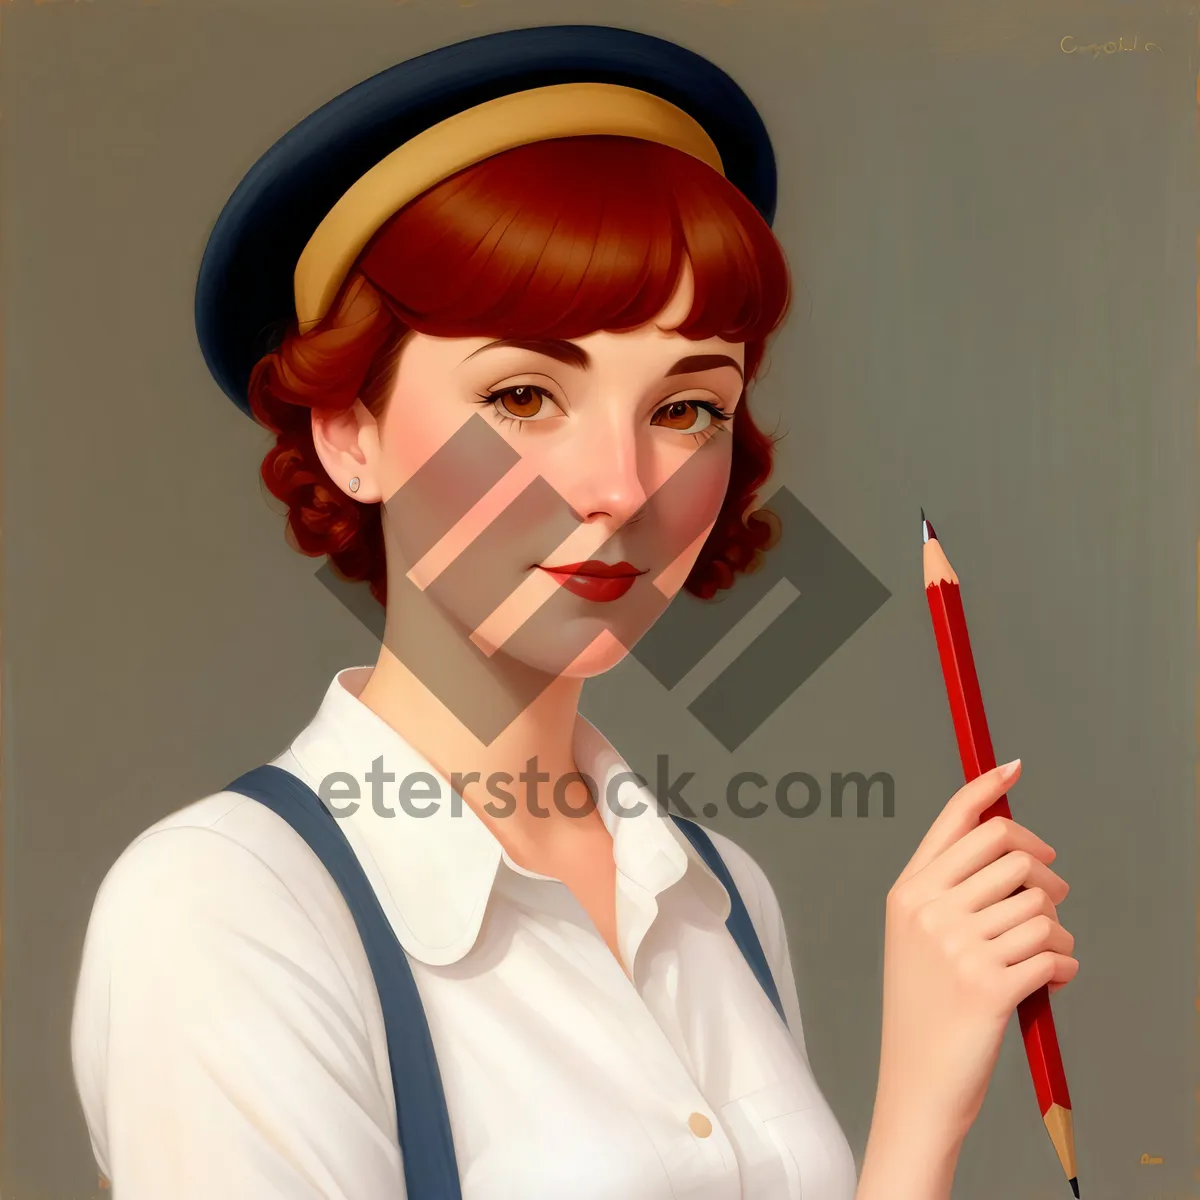 Picture of Smiling doctor with stethoscope and ice lolly